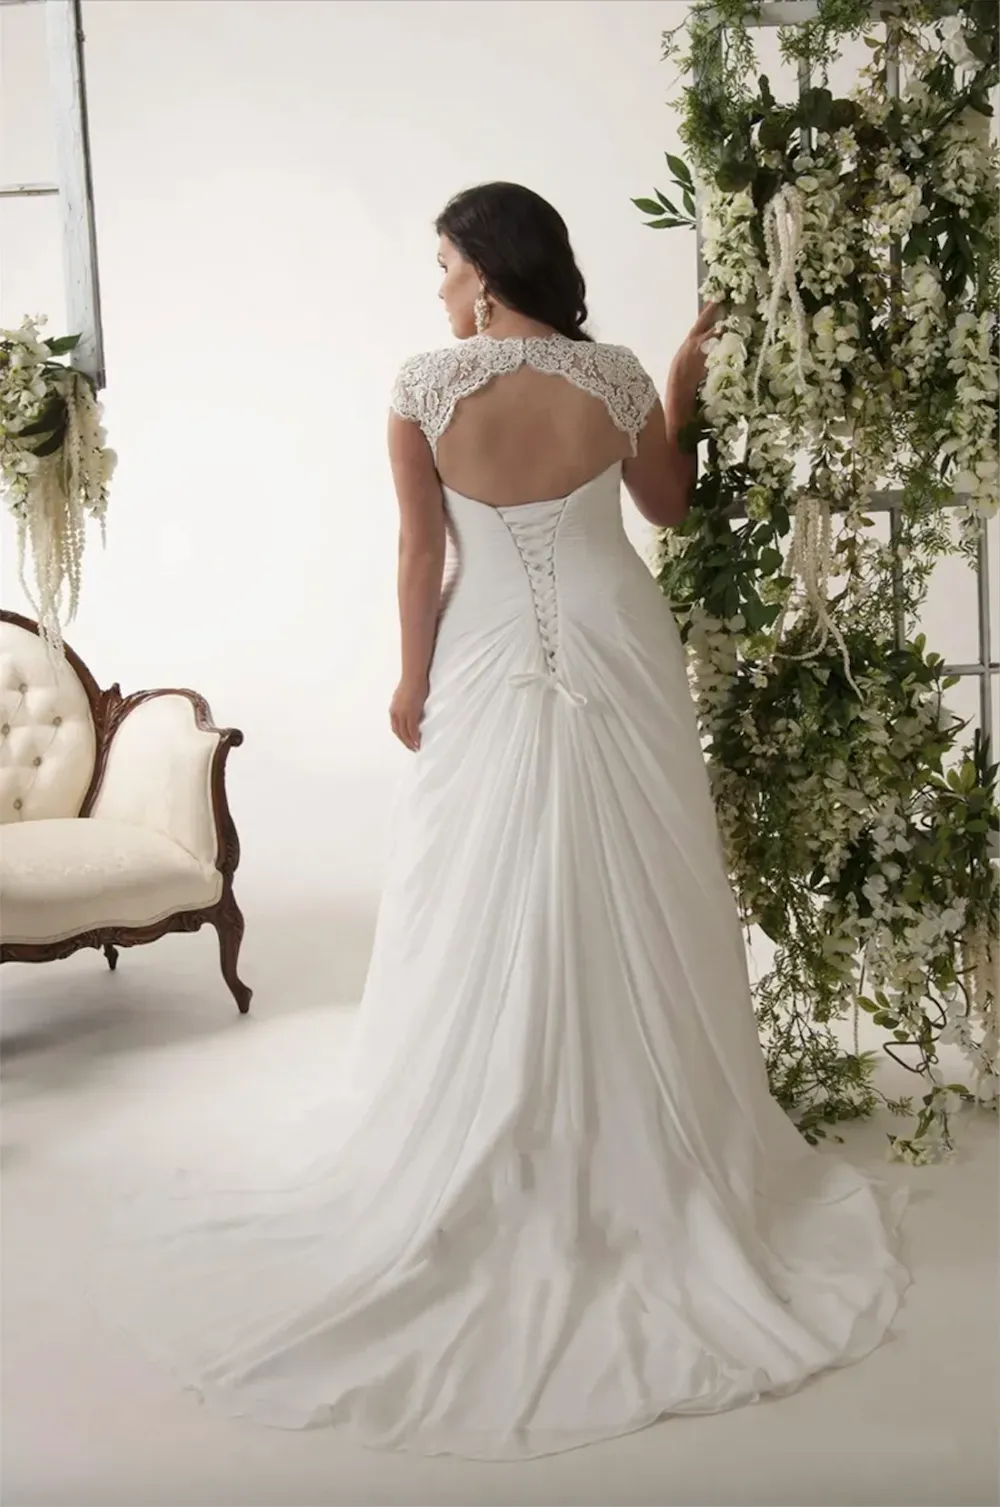 V-neck Cap Sleeves Plus Size Wedding Dresses Chiffon Appliqued Lace Open Back Drape Side Ruched Bodice Bridal Gown